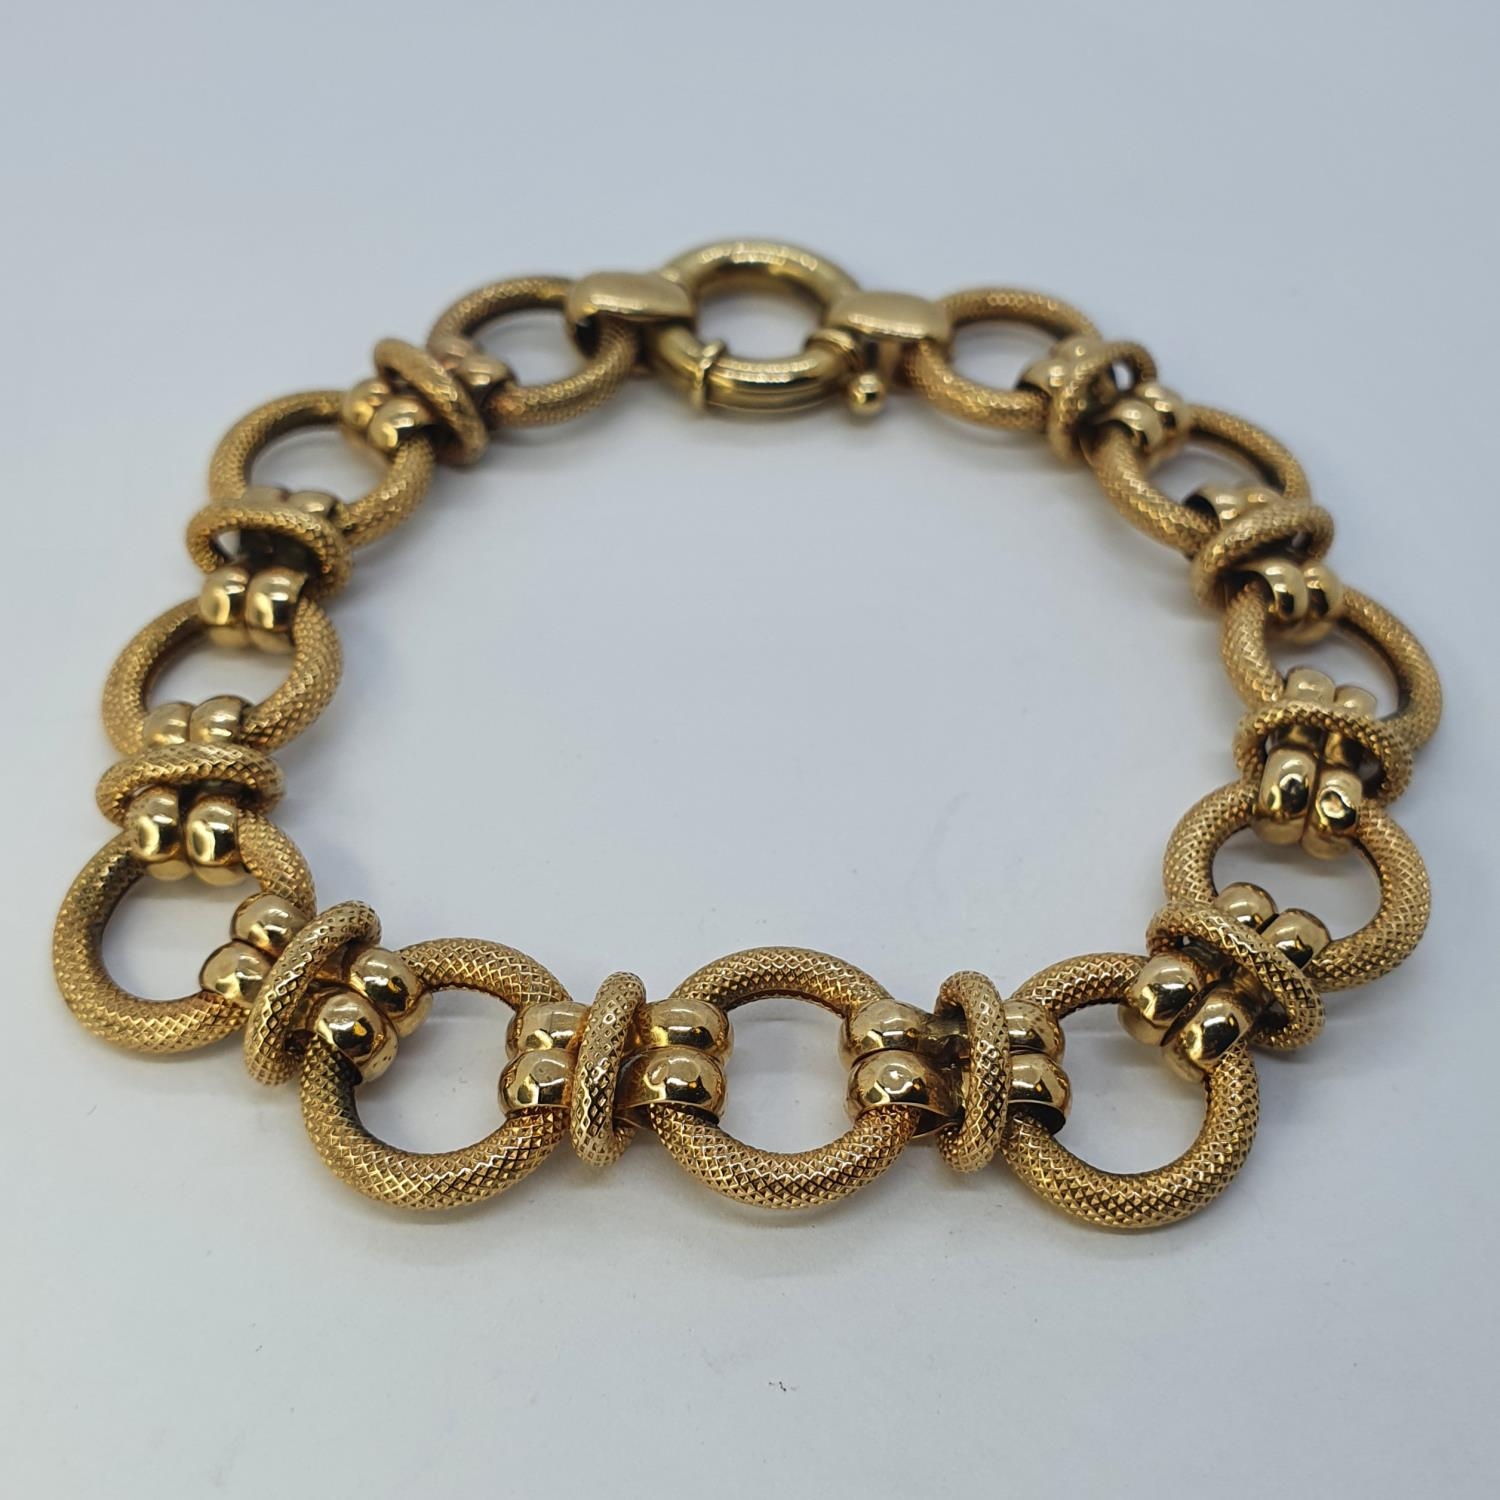 A 9ct gold ring link bracelet, 18.6g 20 cm long Overall condition good no major faults found, - Image 2 of 4